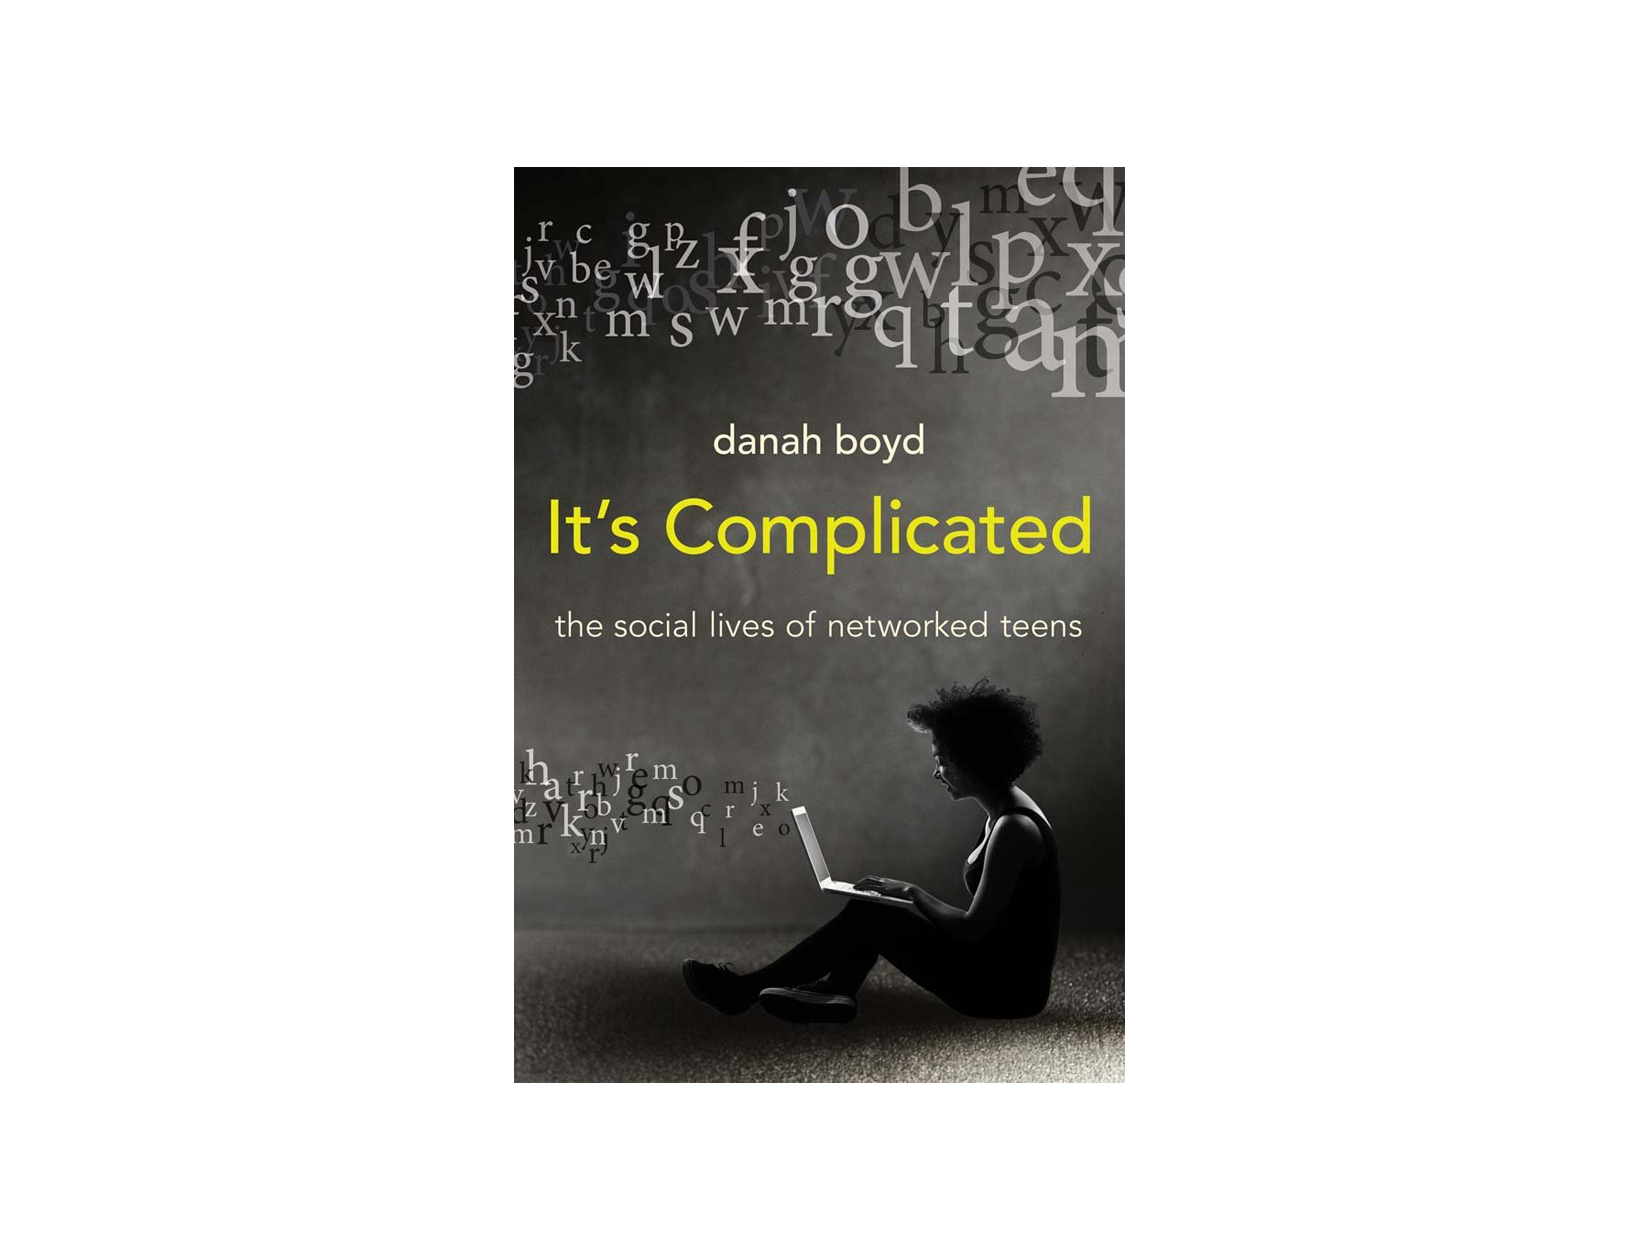 It's Complicated by Danah Boyd